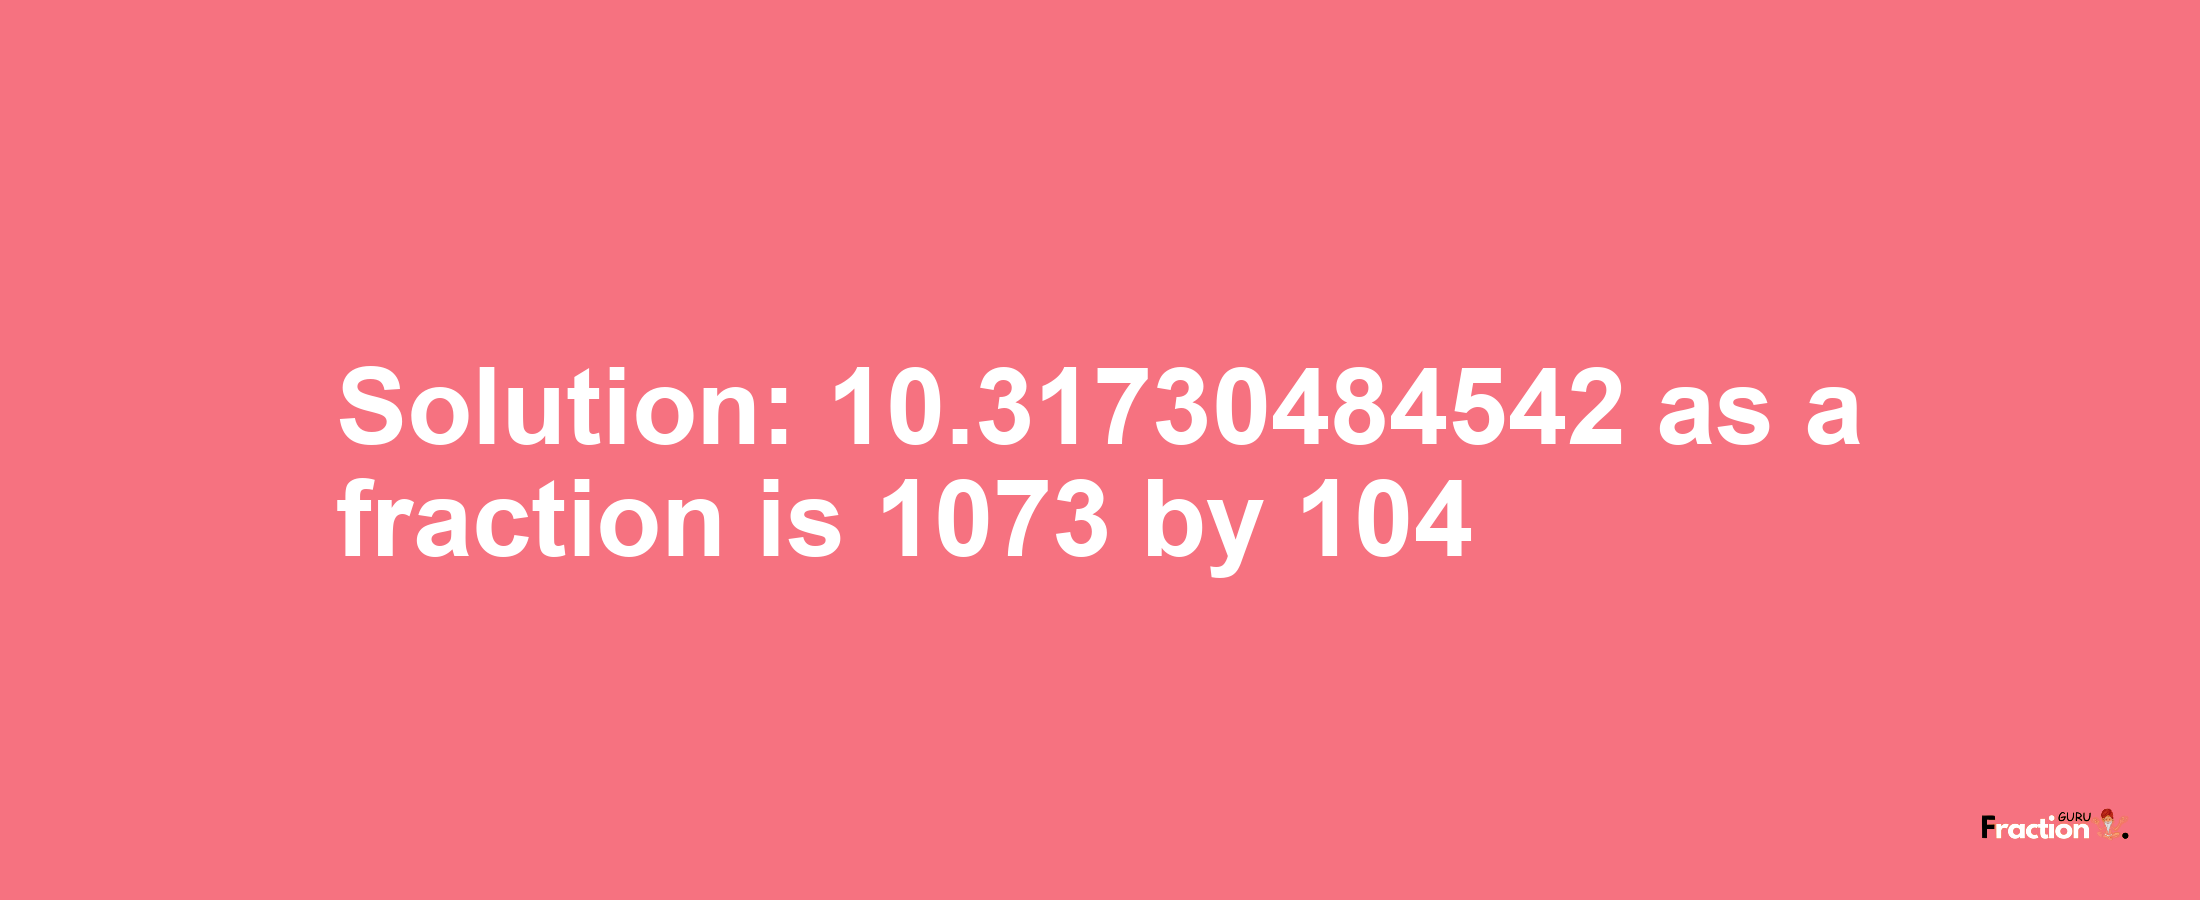 Solution:10.31730484542 as a fraction is 1073/104